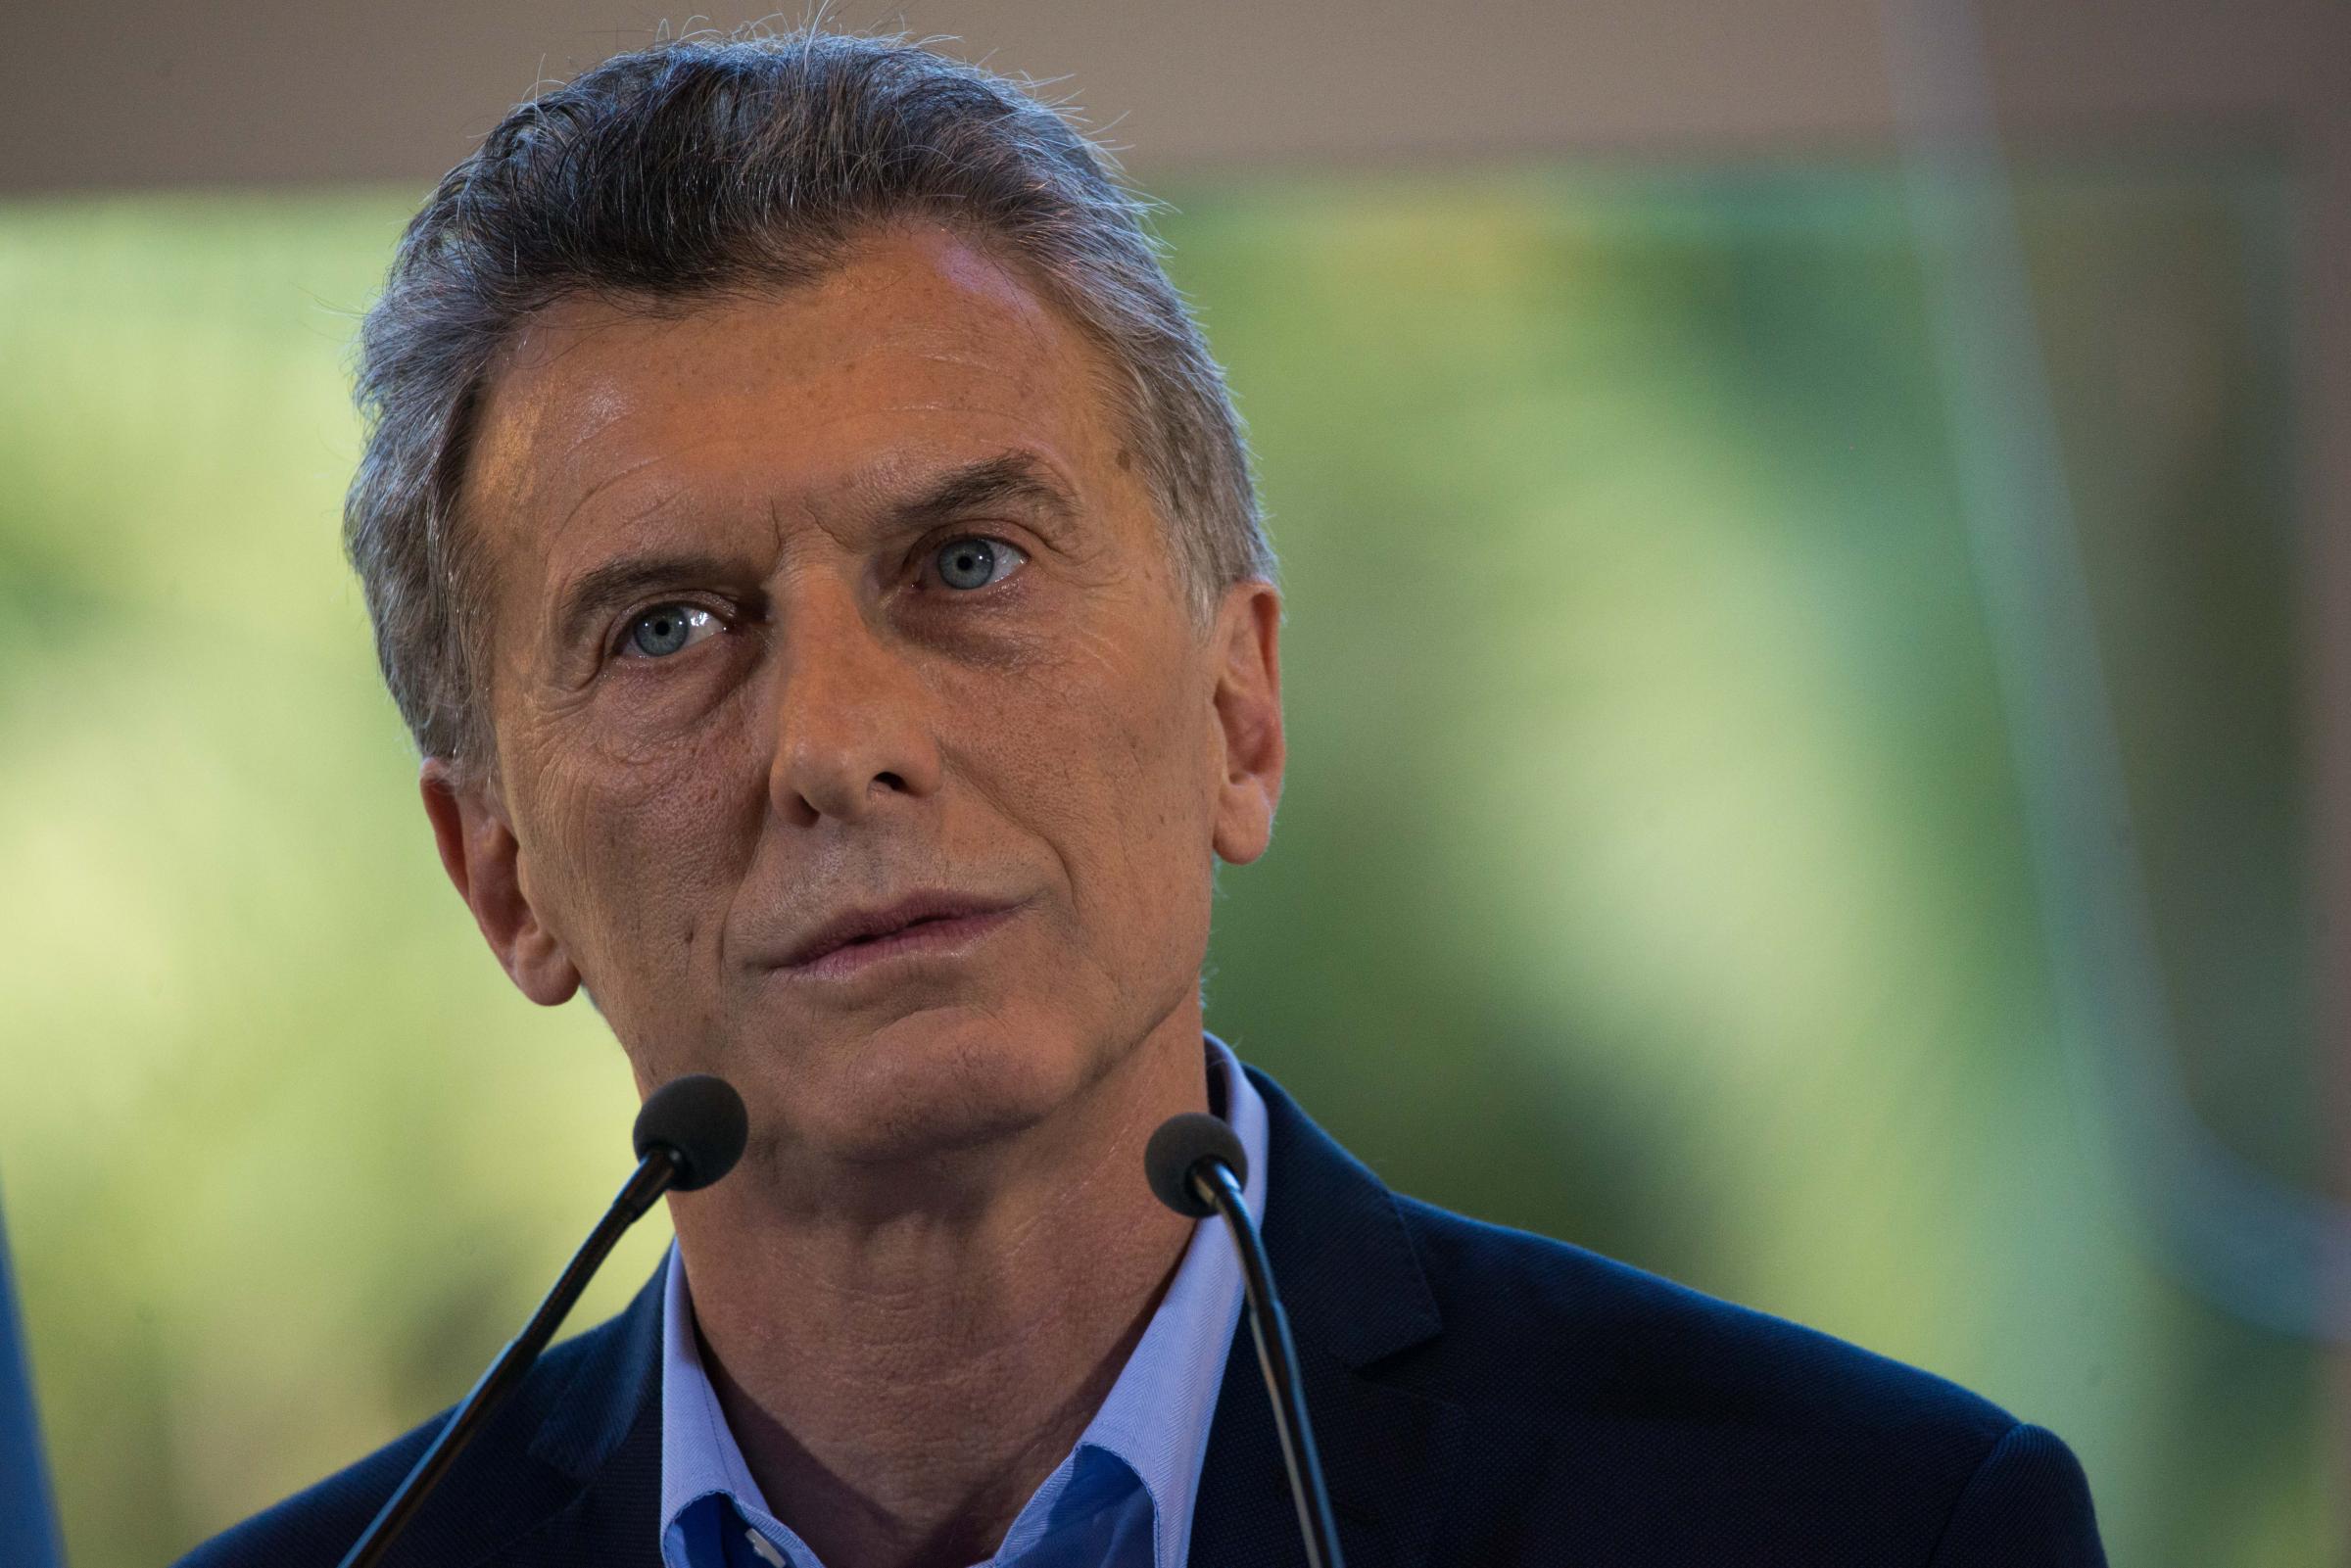 Argentina's President Mauricio Macri announced a reduction of the poverty